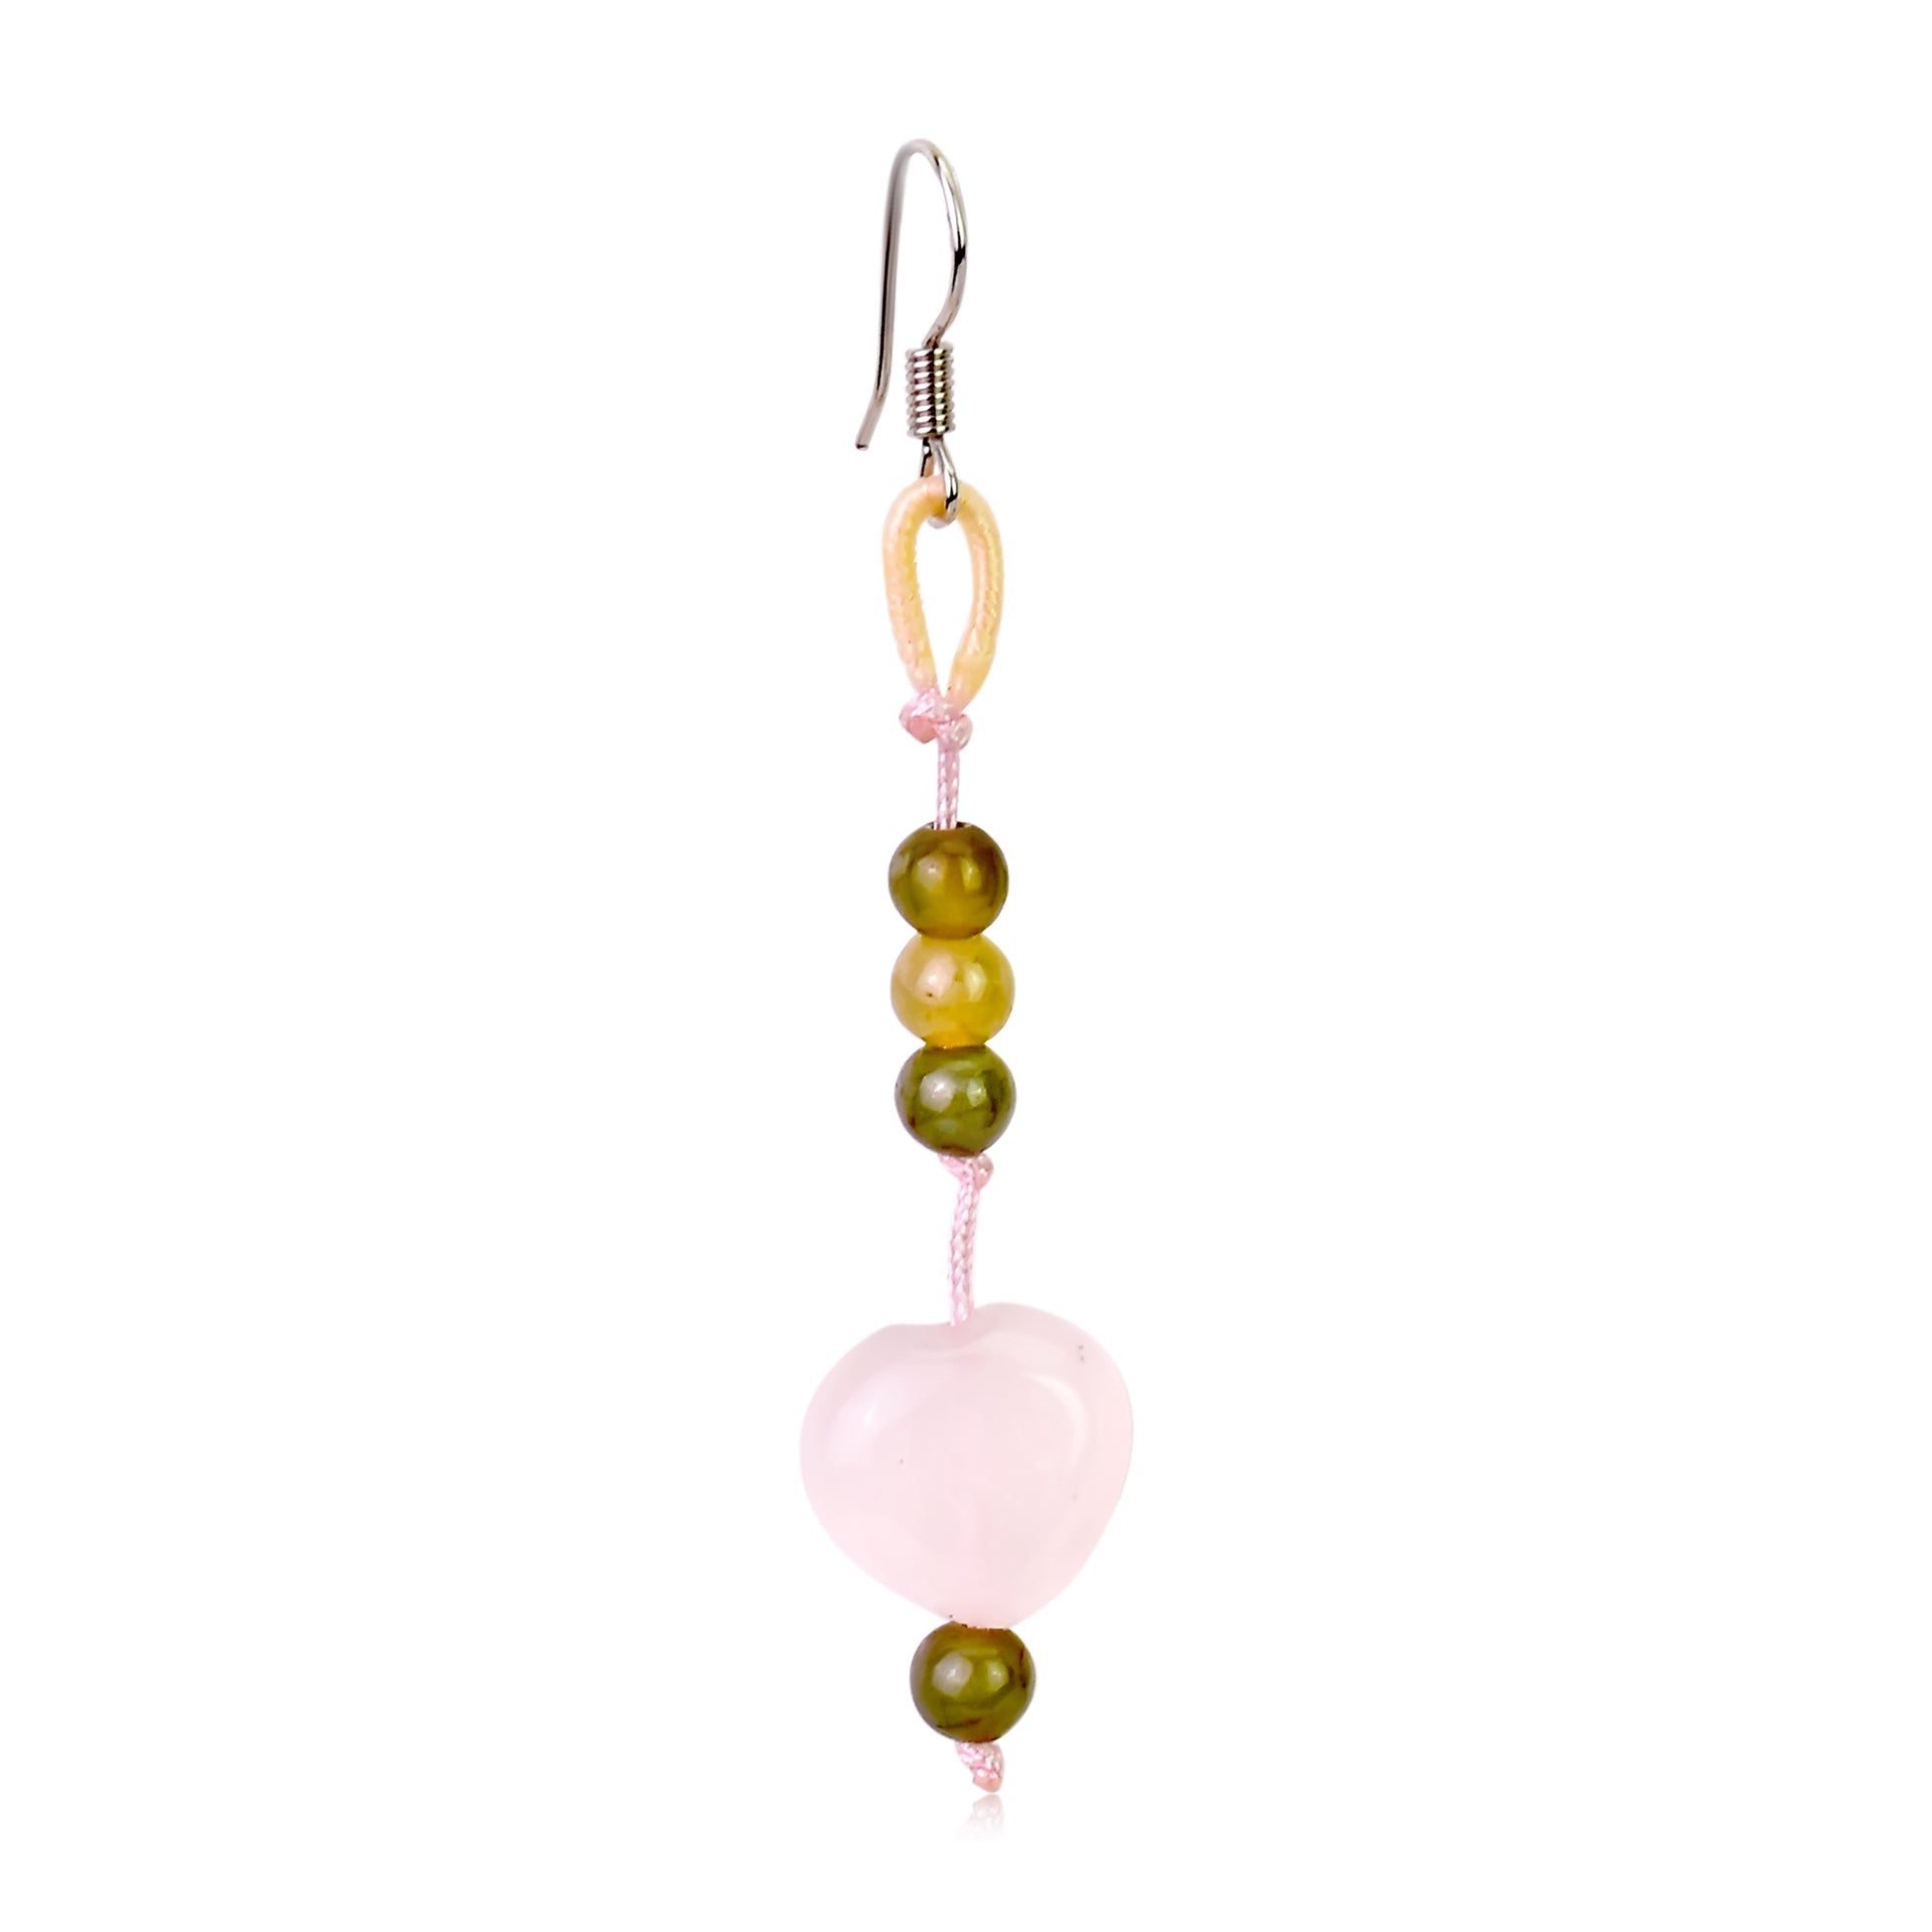 Feel Love with Delightful Rose Quartz Heart Earrings made with Pink Cord